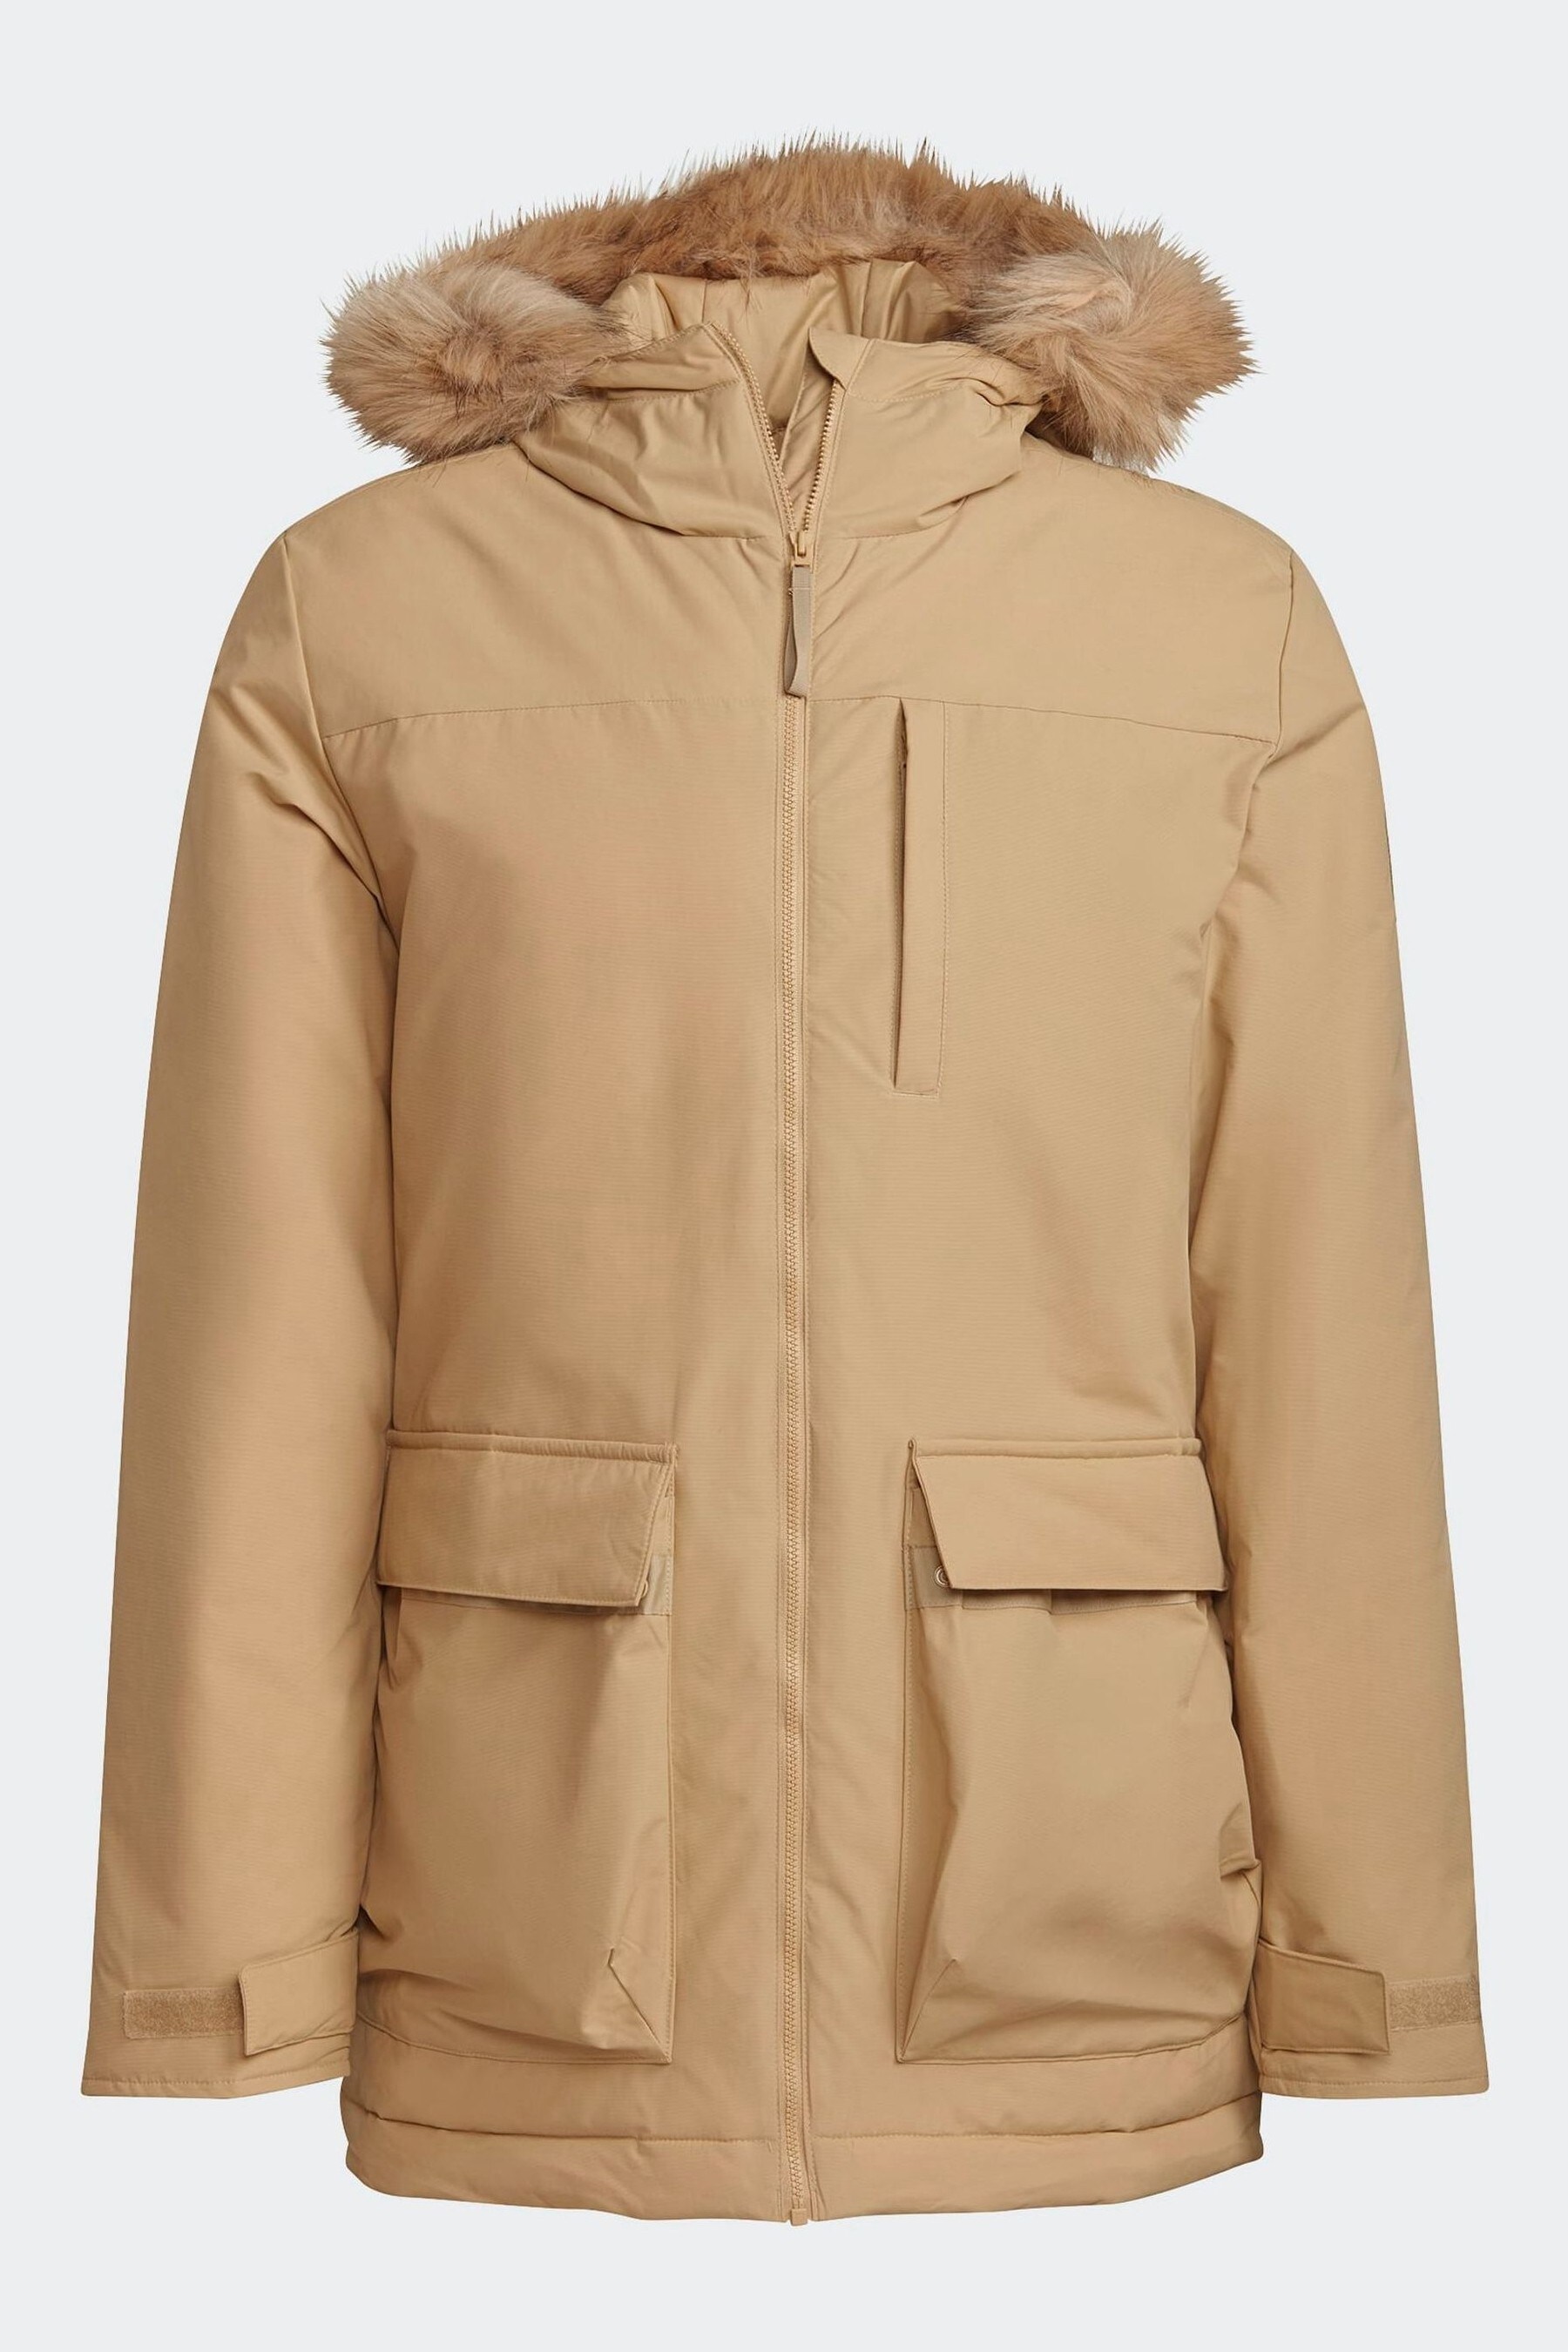 Buy adidas Utilitas Hooded Parka from the Next UK online shop